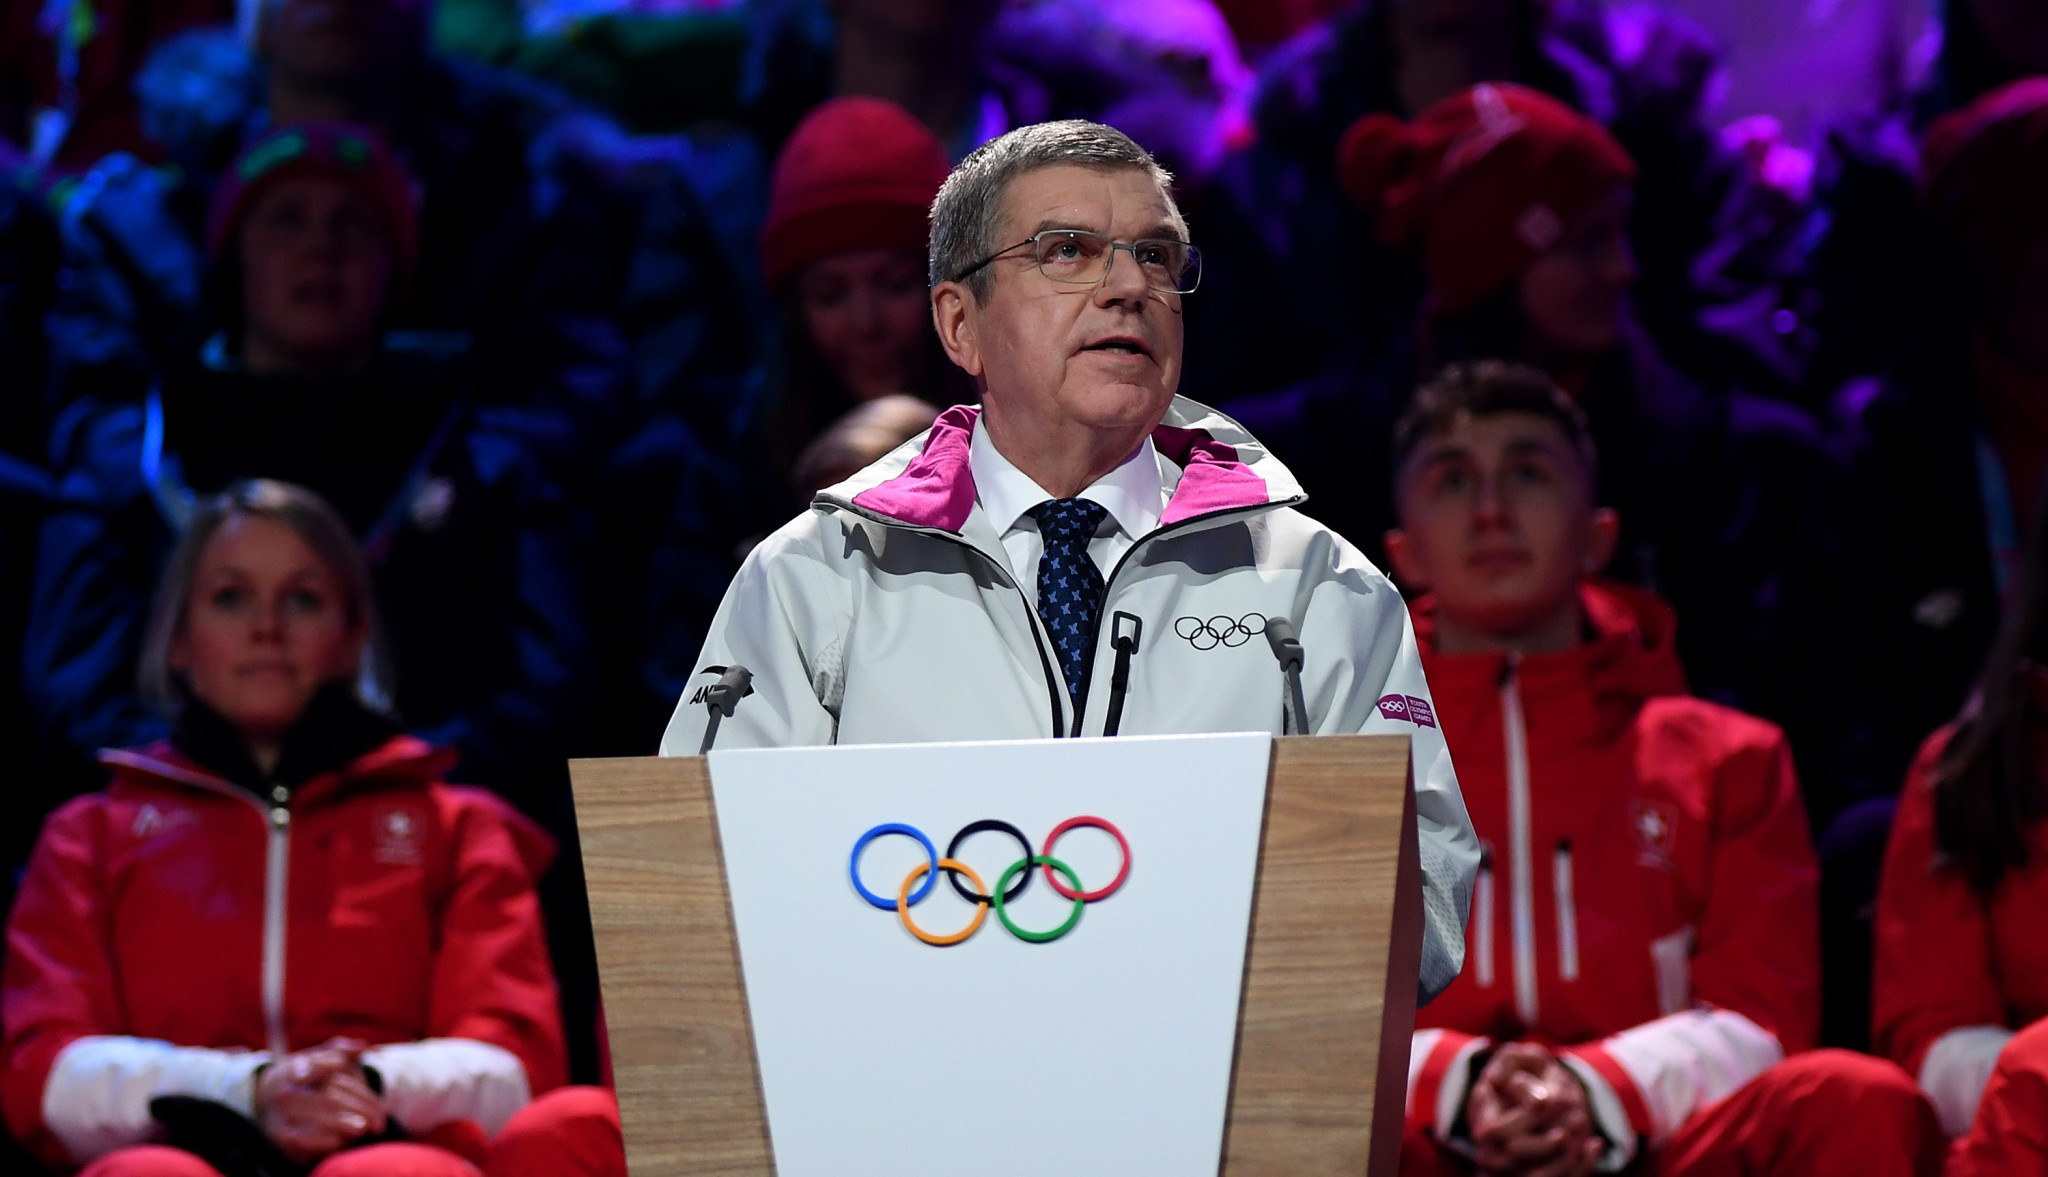 Thomas Bach is poised to lead the IOC until 2025 ©Getty Images